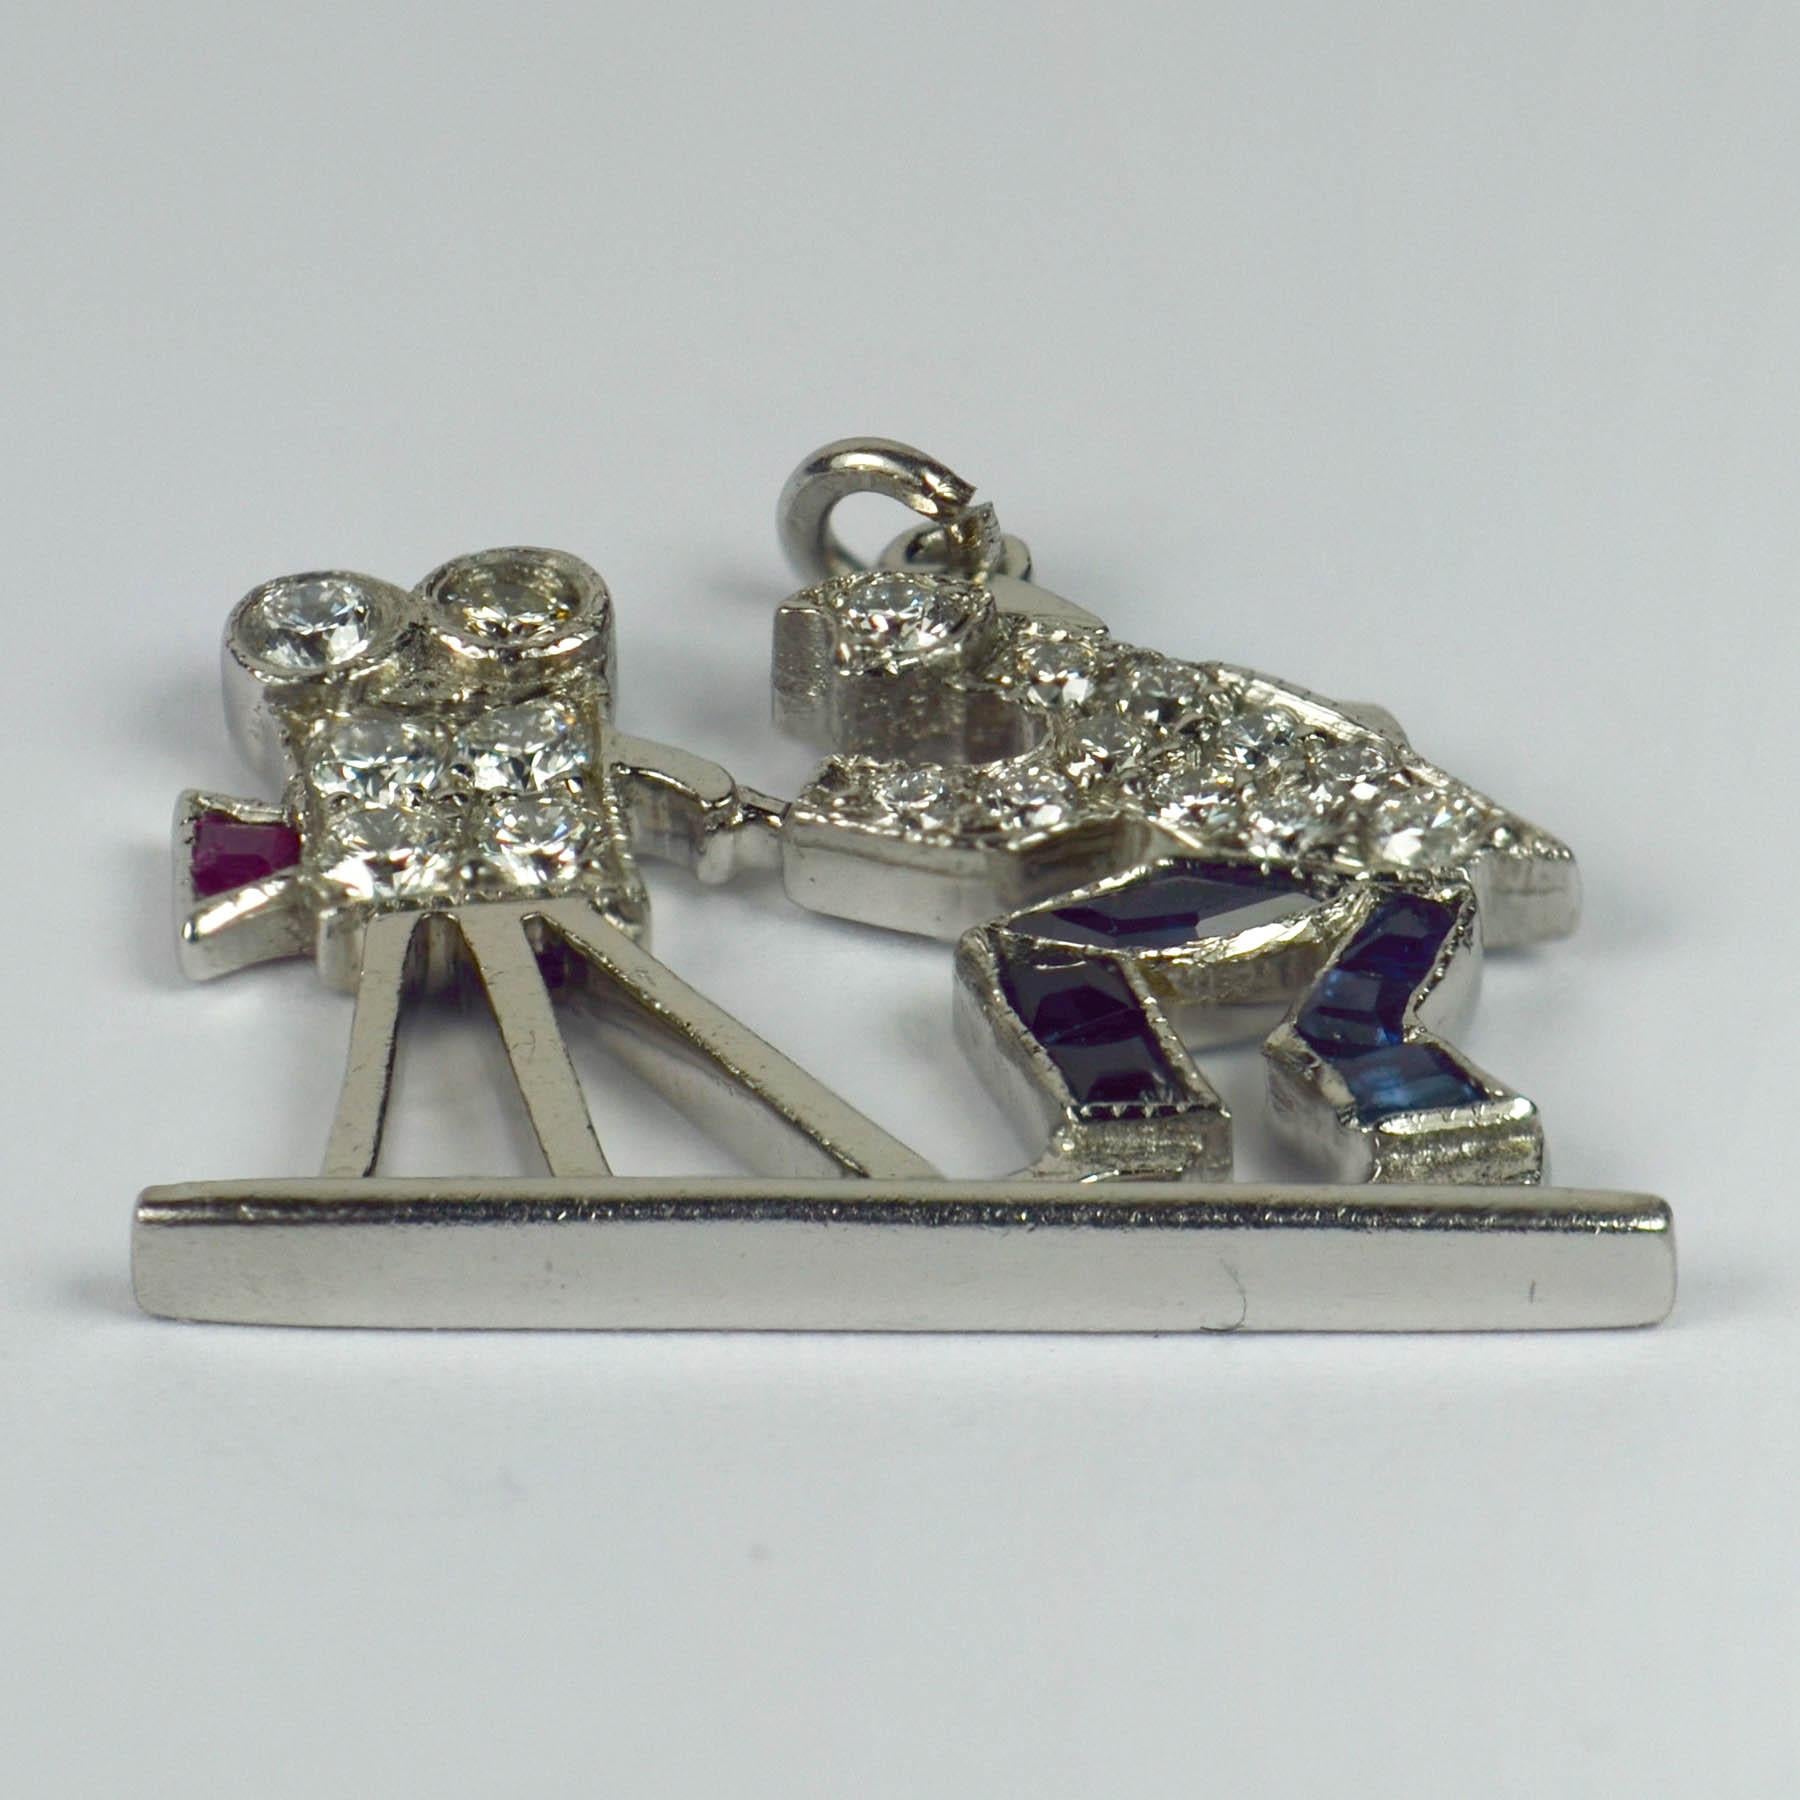 An Art Deco platinum charm pendant designed as a Hollywood cameraman behind a film camera set with 17 round brilliant cut diamonds, six step cut blue sapphires and a step cut ruby. Unmarked but tested as platinum. 

Estimated total gem weights: